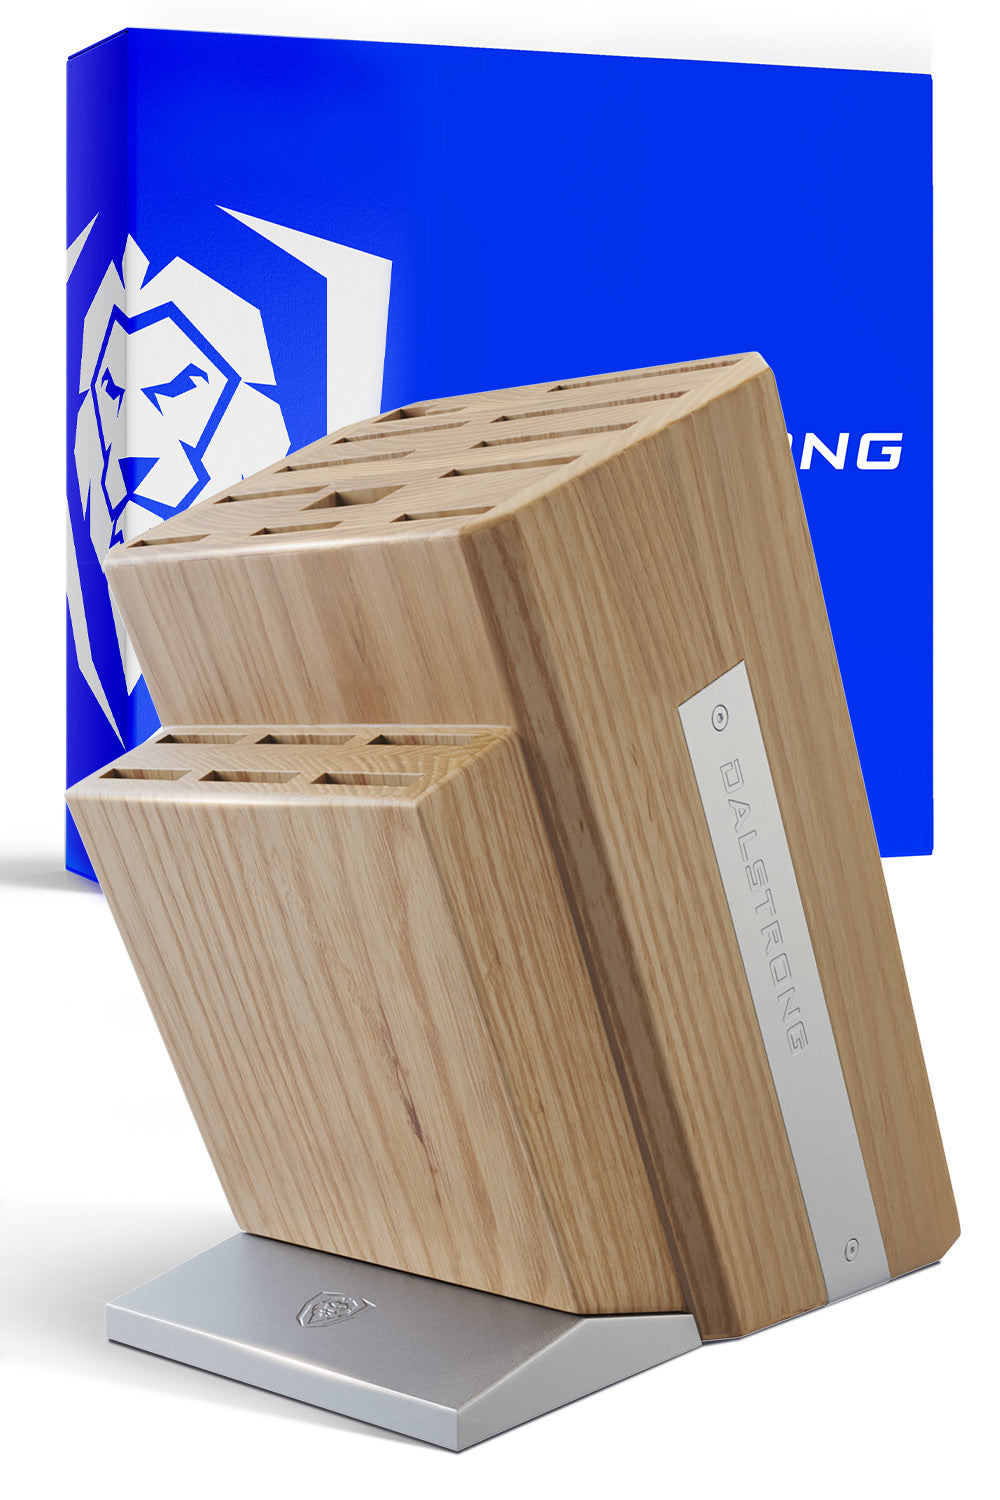 Dalstrong 18 slots universal knife block in front of it's premium packaging.